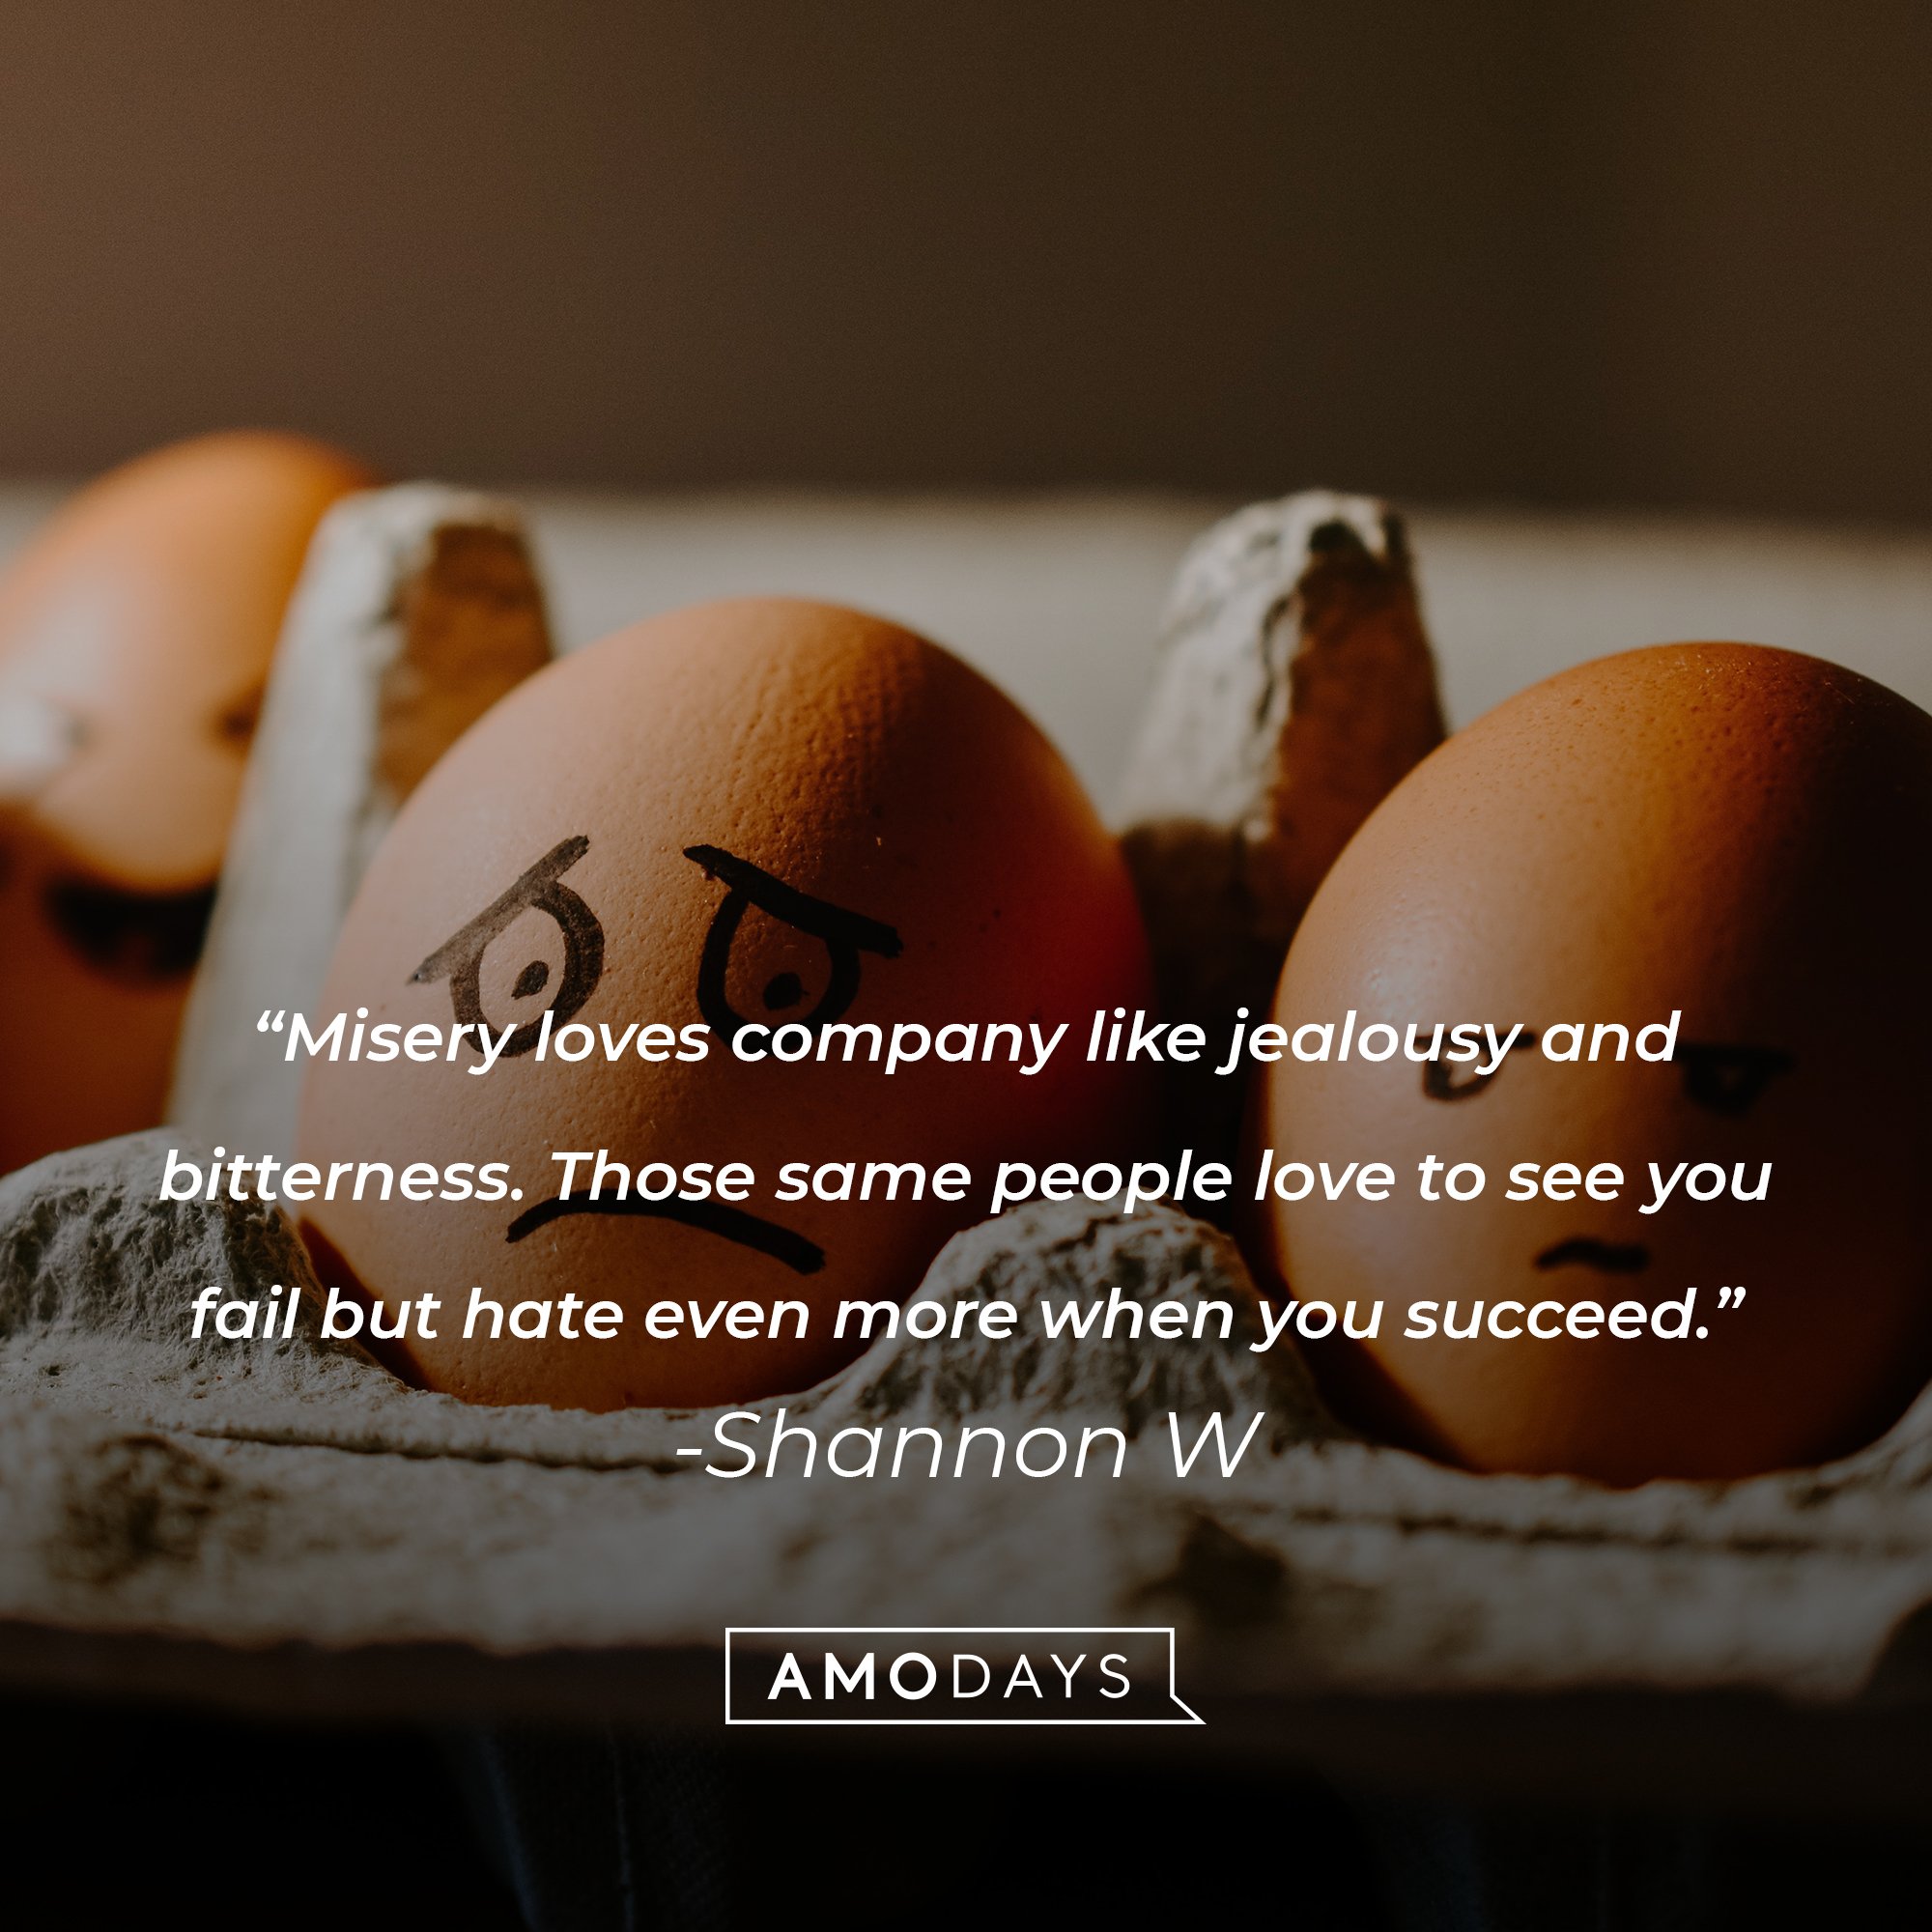  Shannon W’s quote: "Misery loves company like jealousy and bitterness. Those same people love to see you fail but hate even more when you succeed." | Image: AmoDays